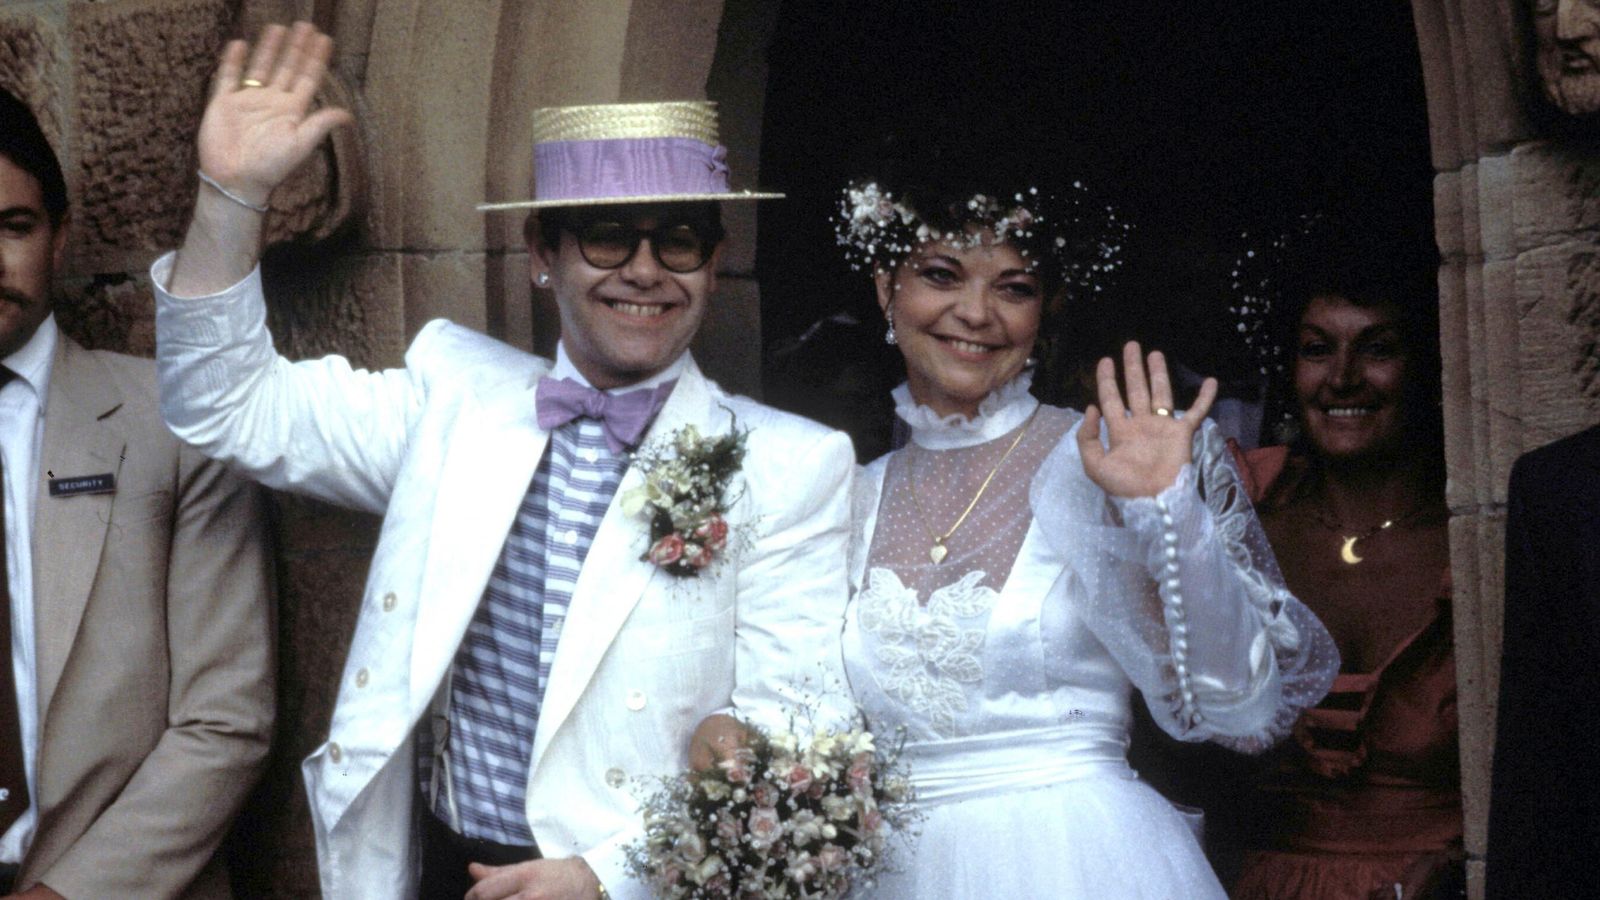 Sir Elton John in £3m court battle as ex-wife accuses him of breaching divorce contract thumbnail